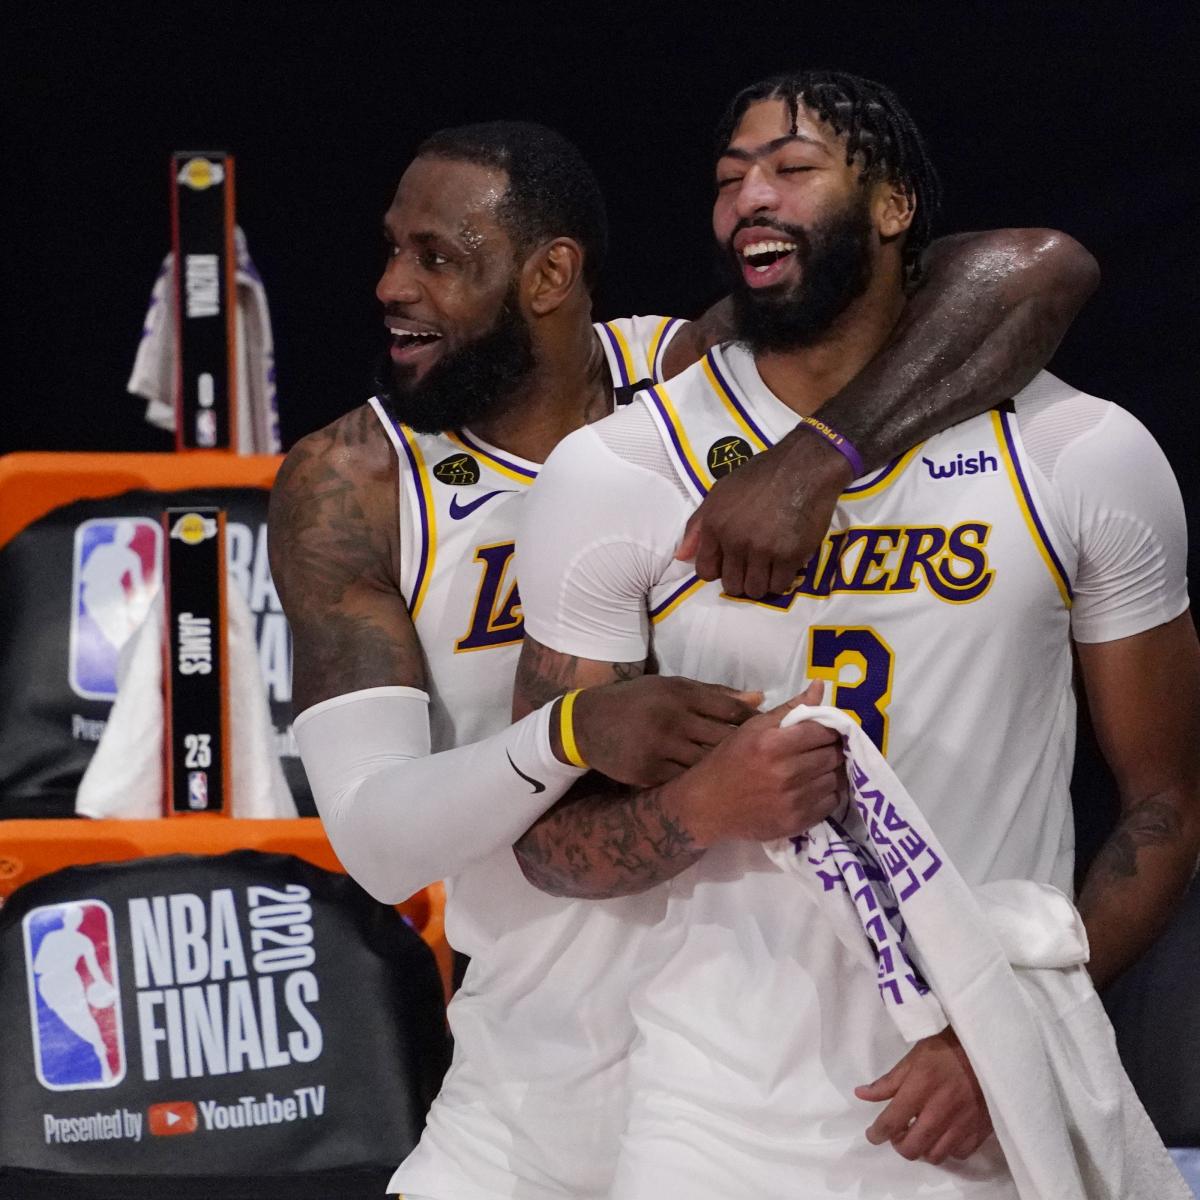 Lakers vs. Heat series 2020: TV info, game schedule, results, scores,  recaps, stats for NBA Finals - DraftKings Network